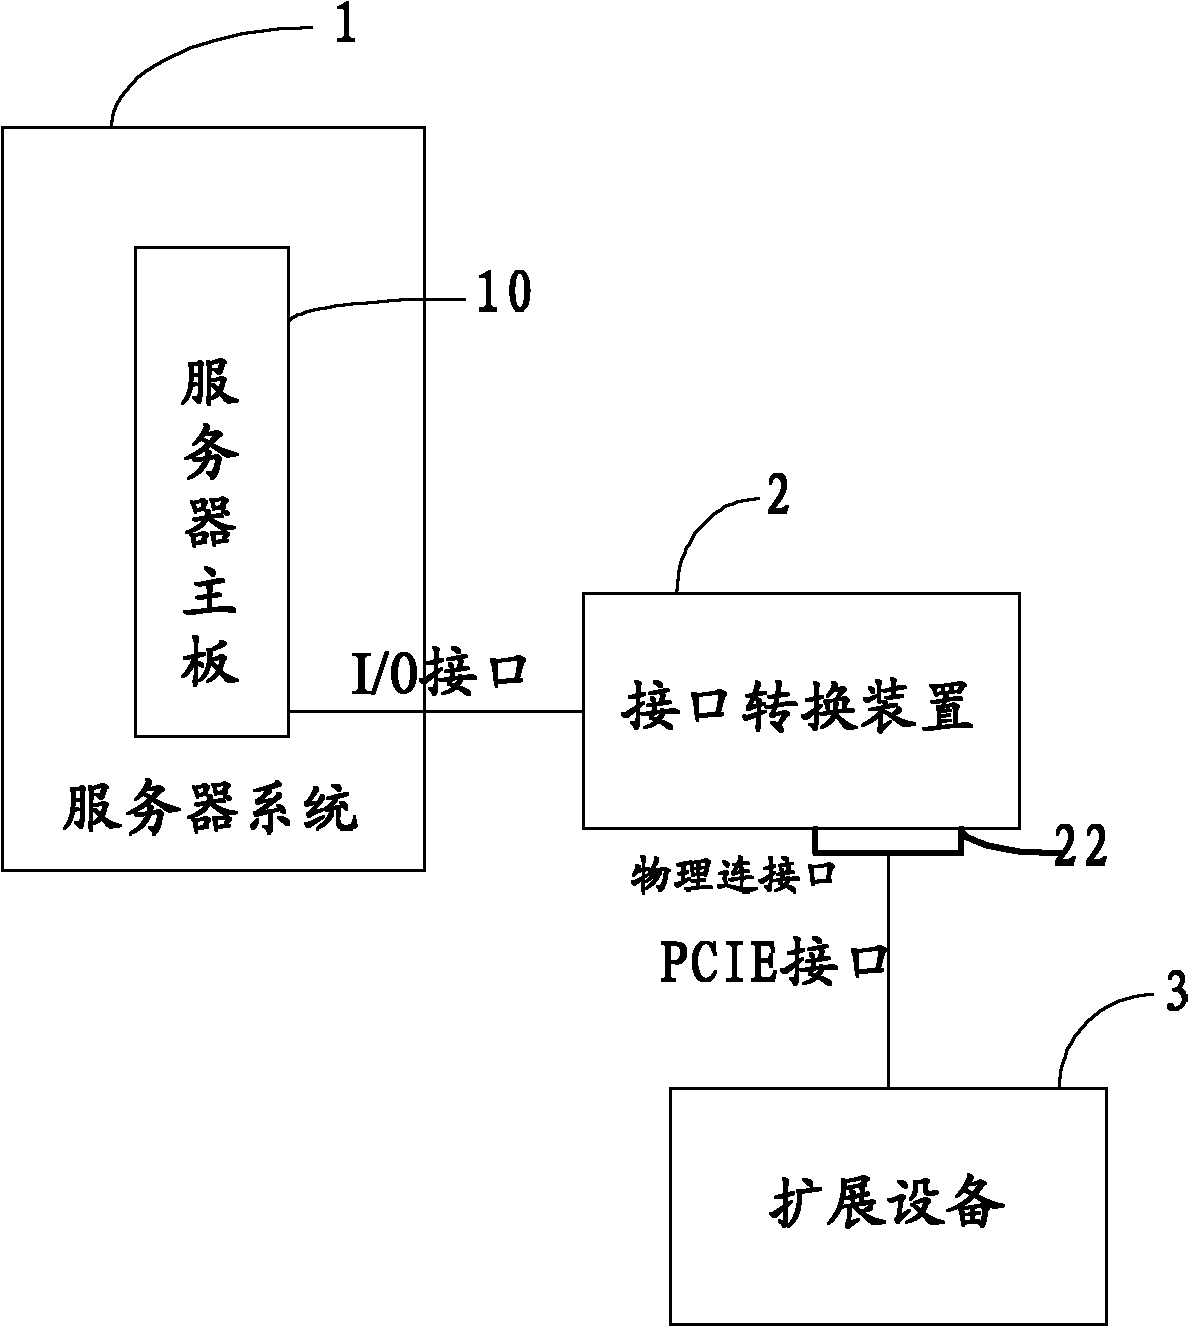 Method and system capable of realizing high-speed interconnection between devices